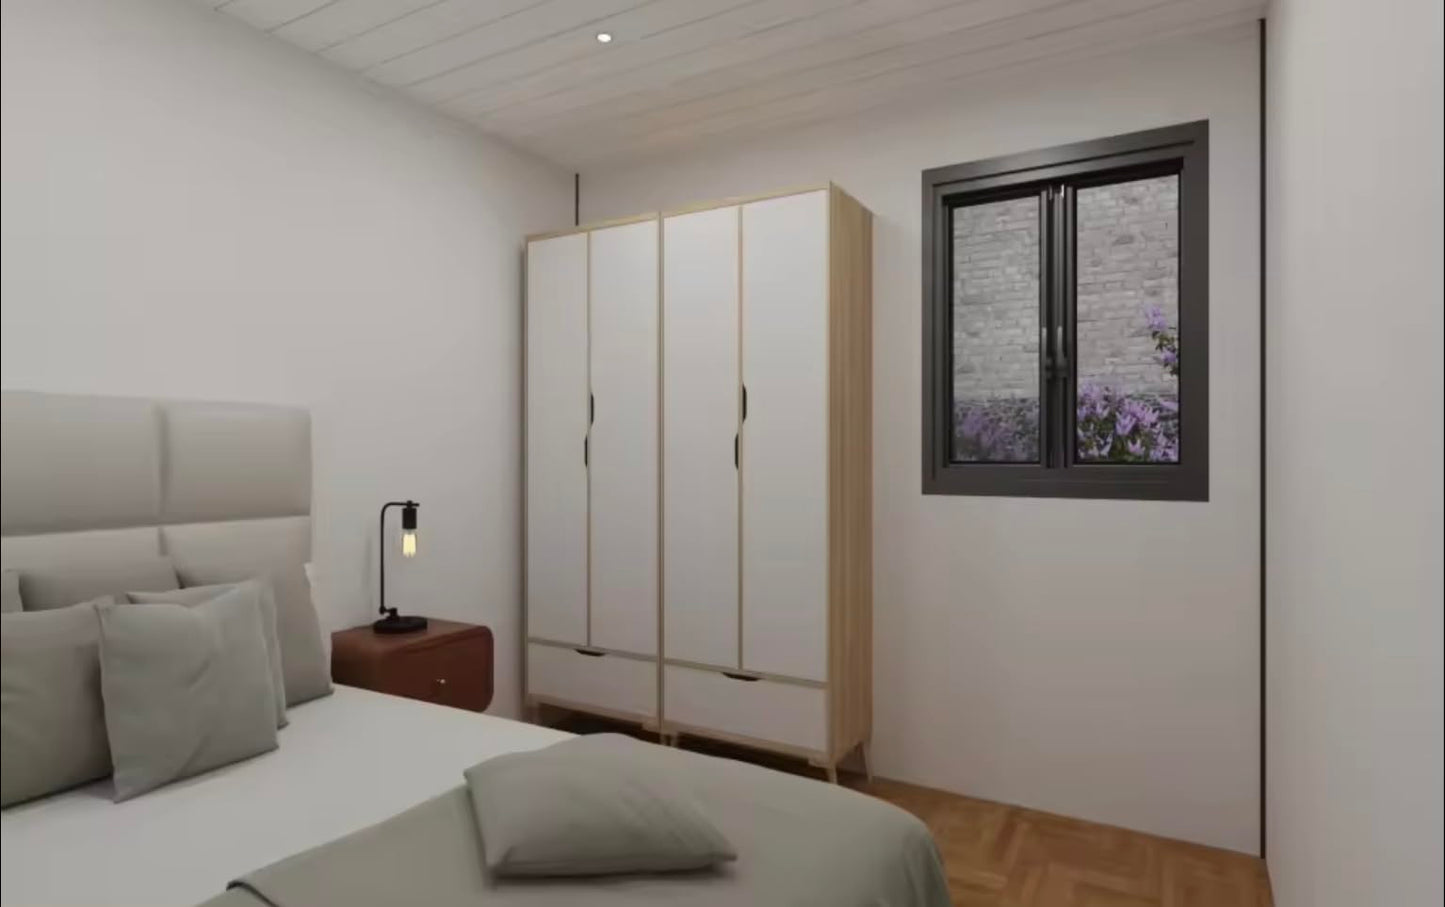 Luxury Two-Story 3-Bedroom prefab Container Homes with Bathroom, prefabricated Living Expandable Container House, Portable Family Foldable Container Home, Luxury Kitchen Cabinet.